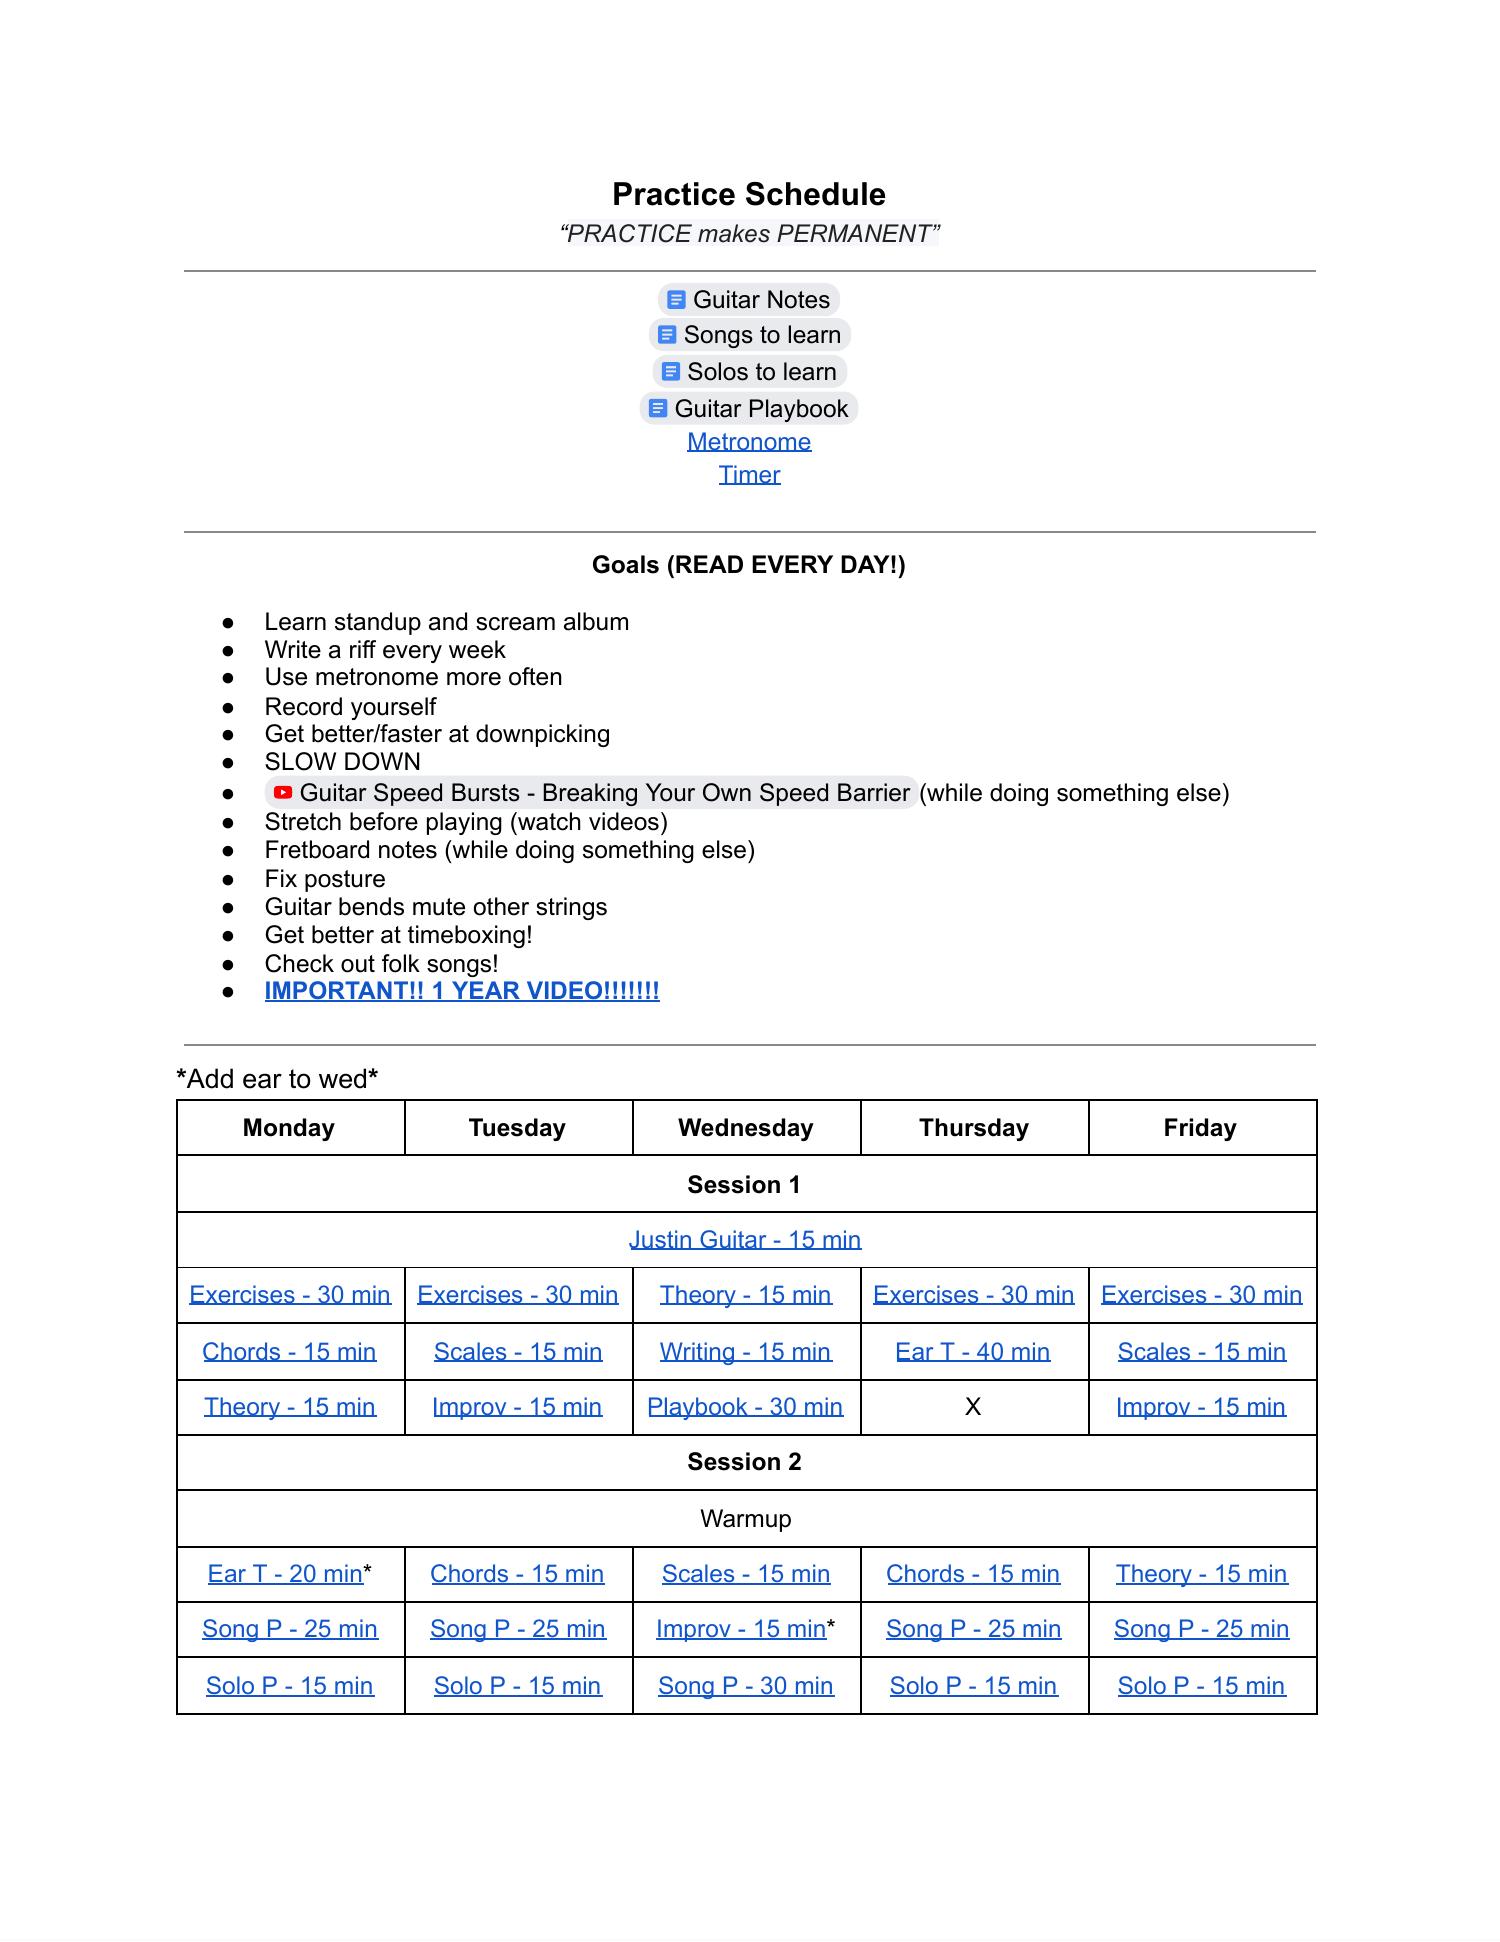 extended daily guitar practice schedule pdf